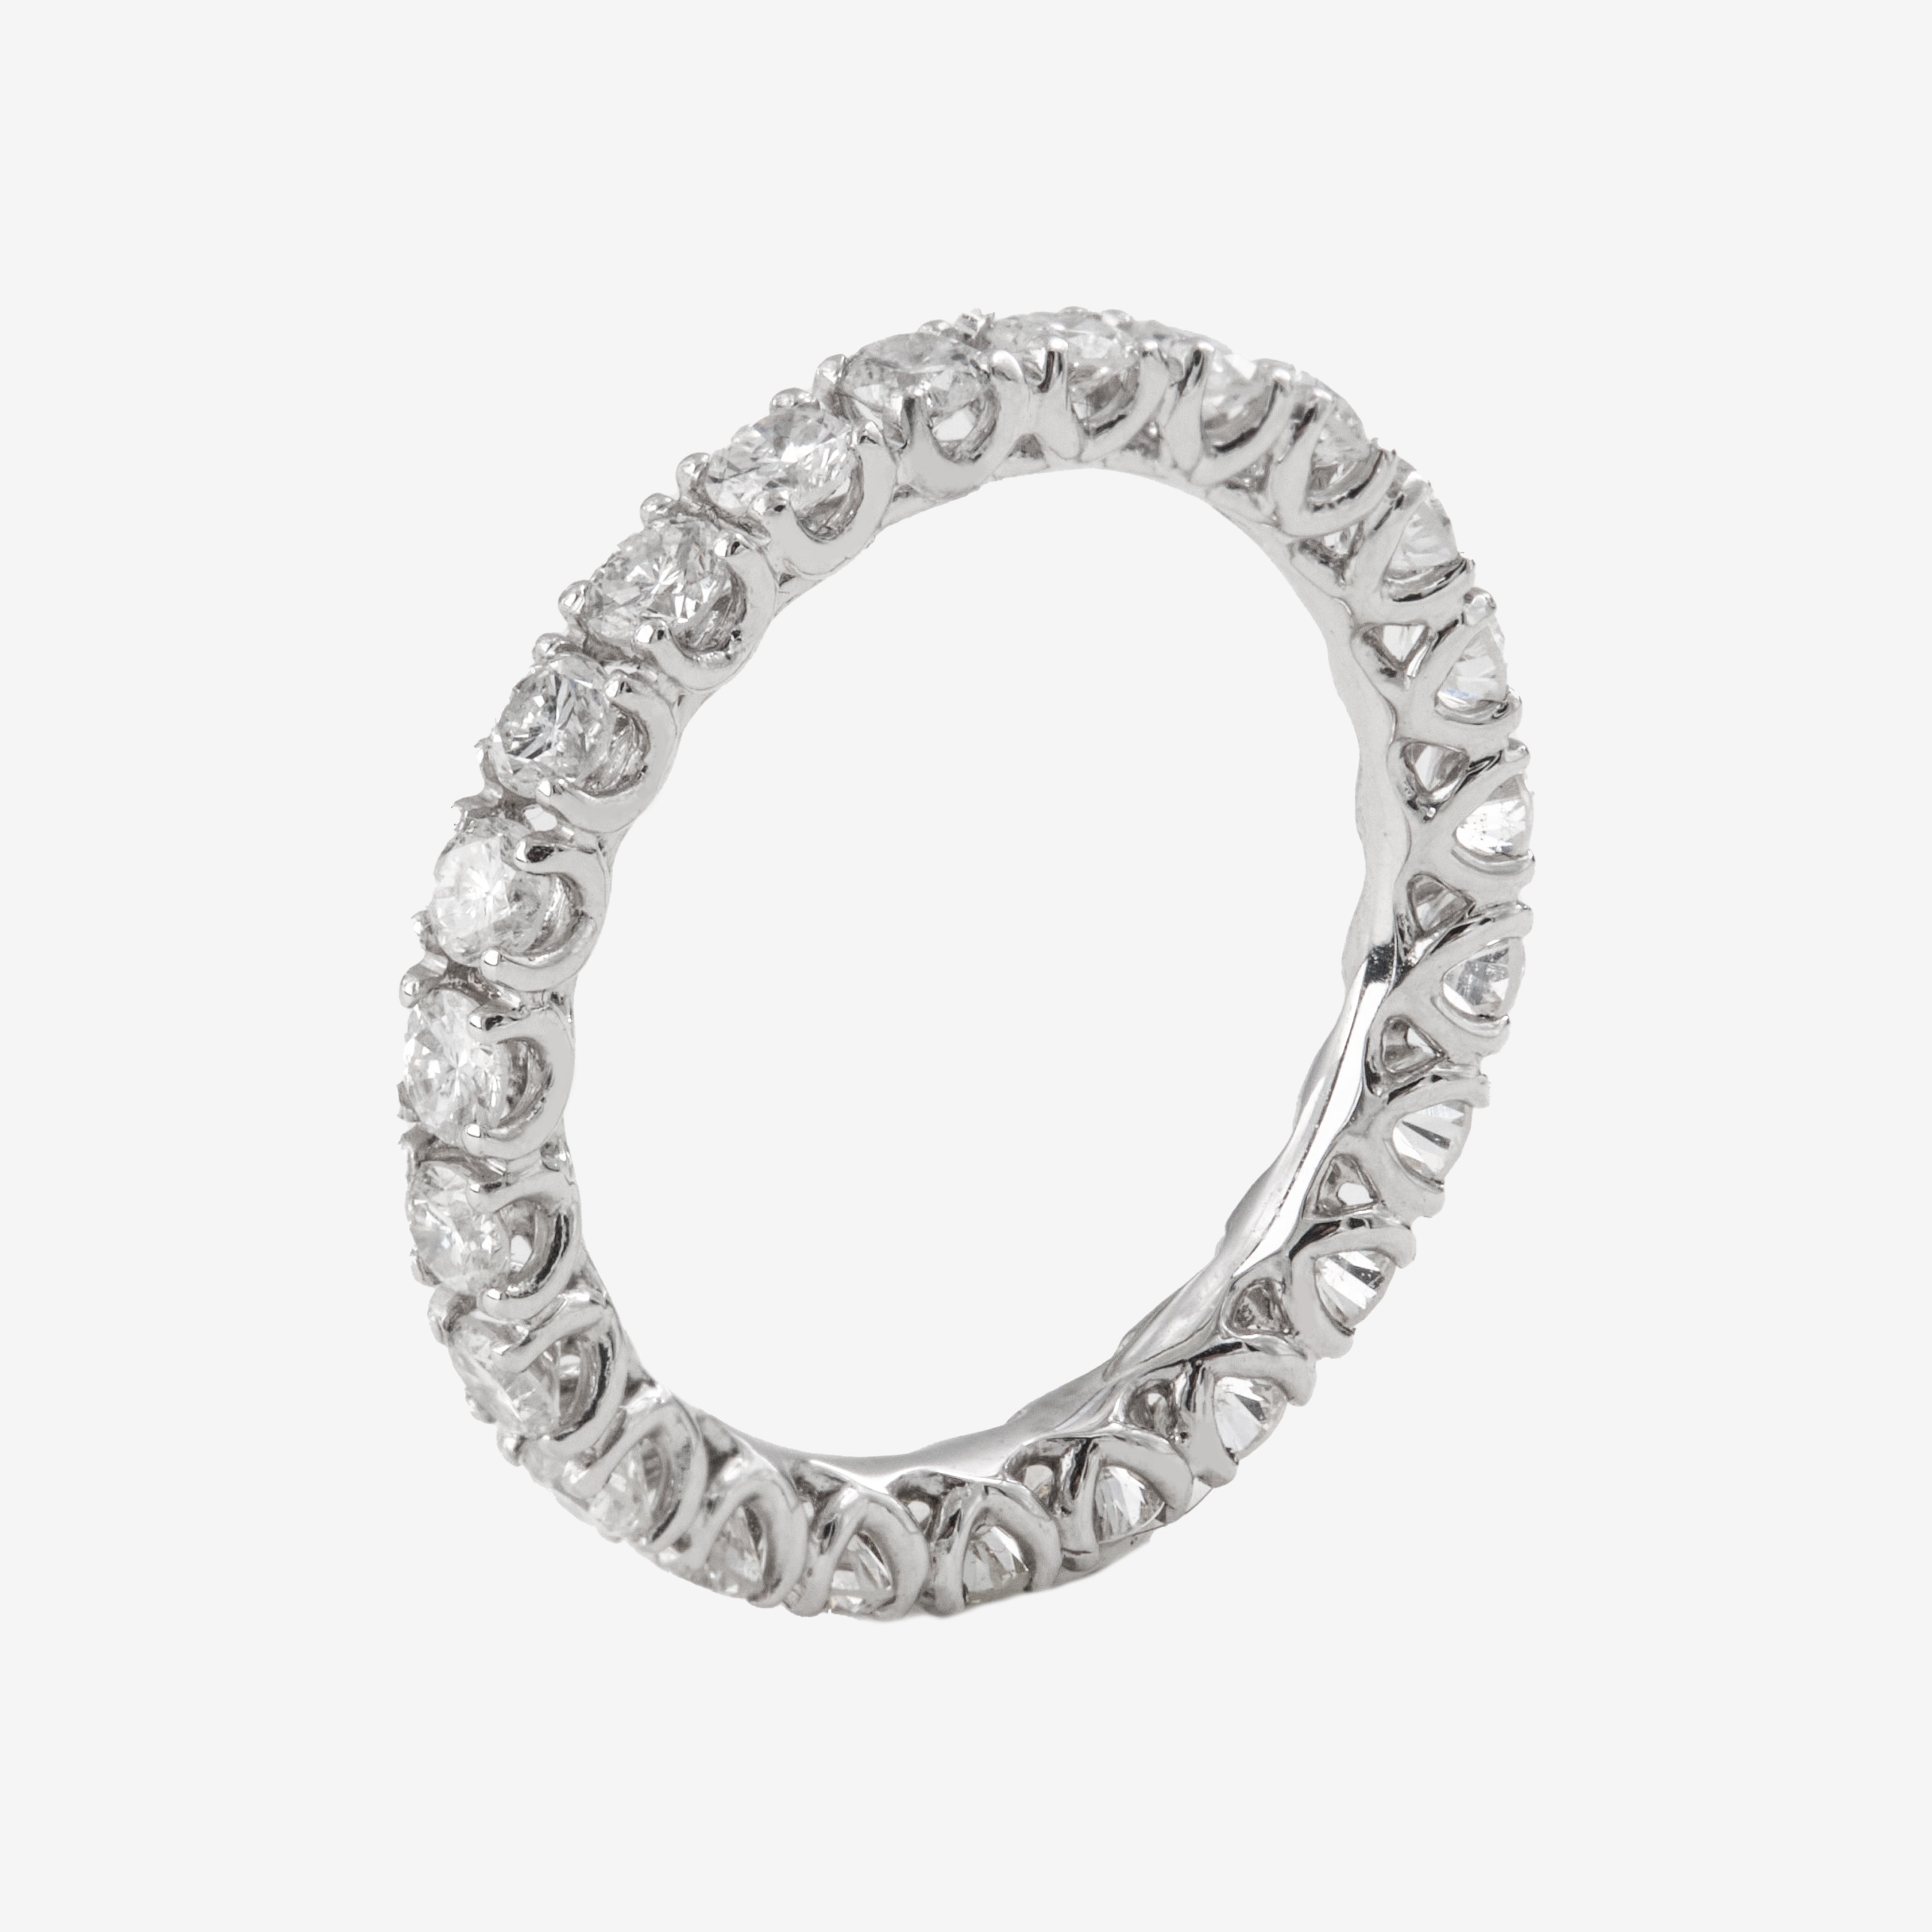 White Gold Eternity Ring with White Diamonds 1.5ct